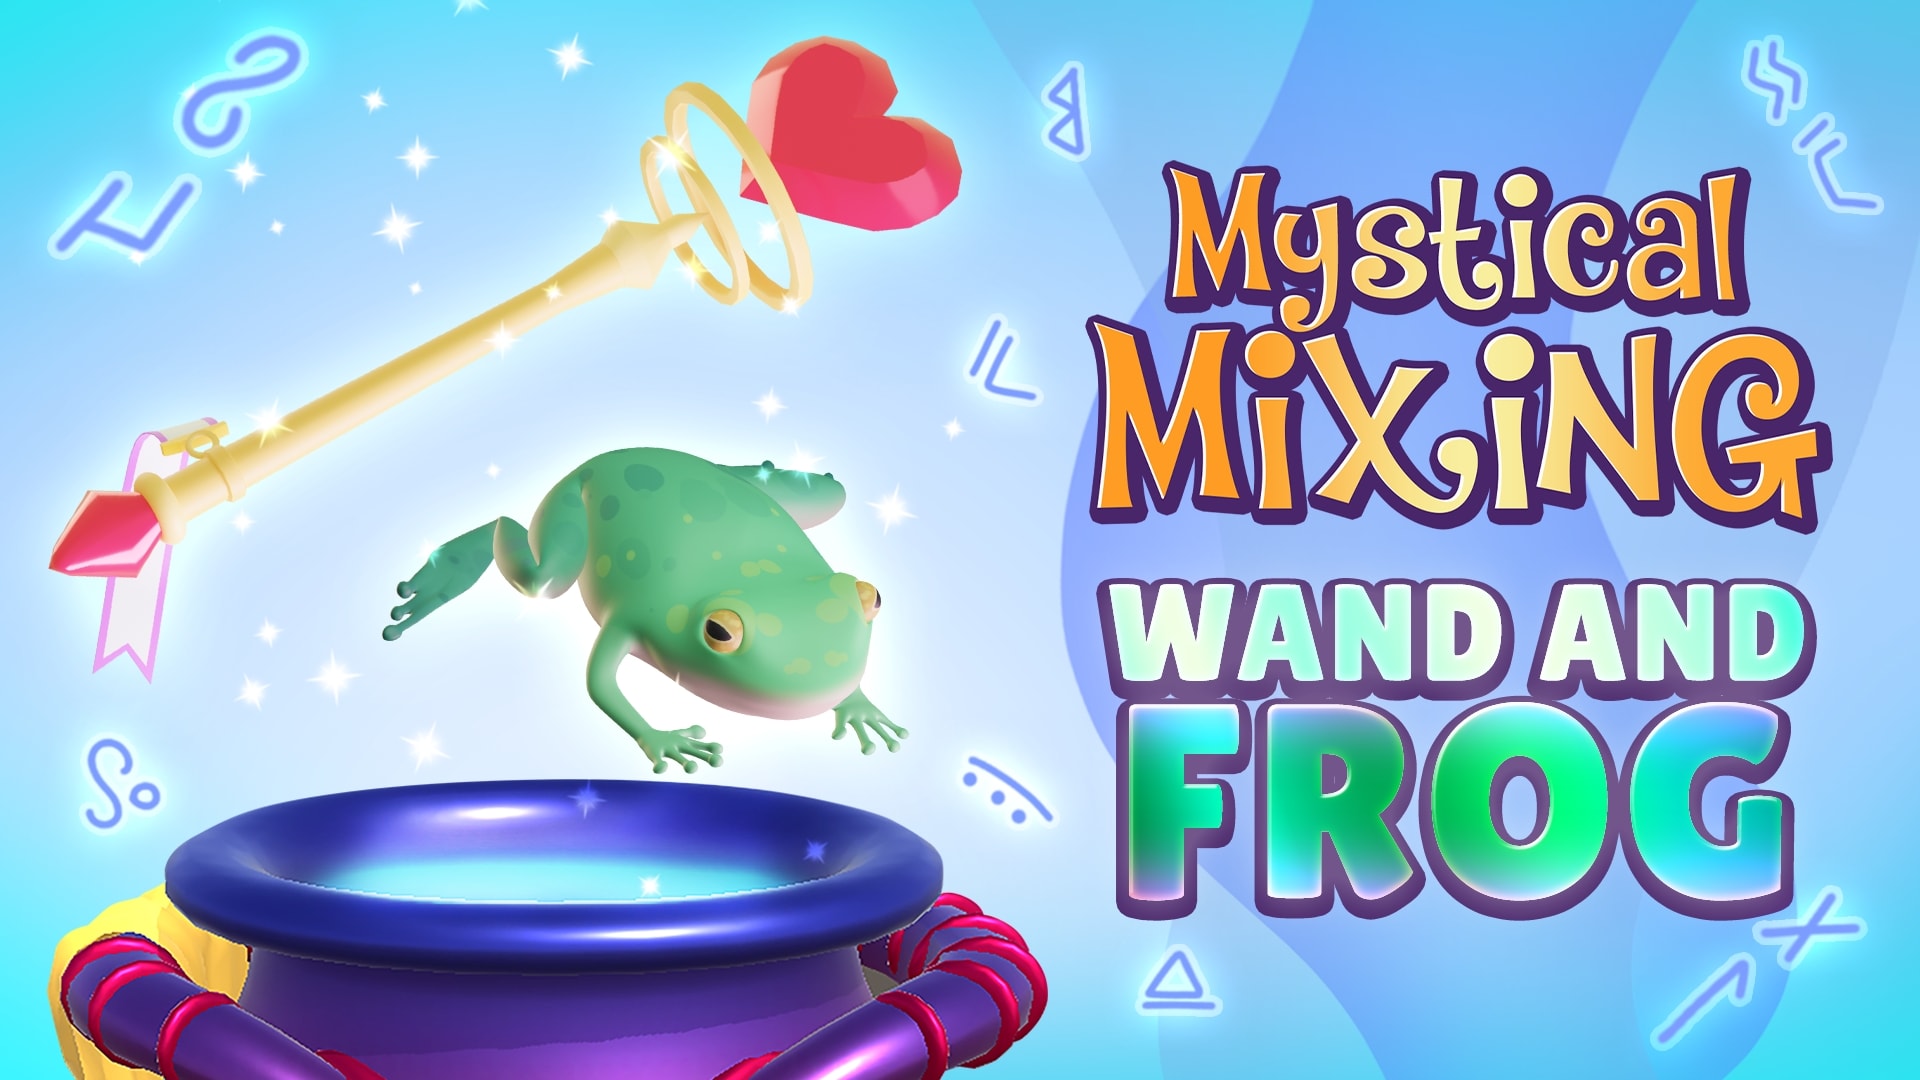 Mystical Mixing: Wand and frog 1